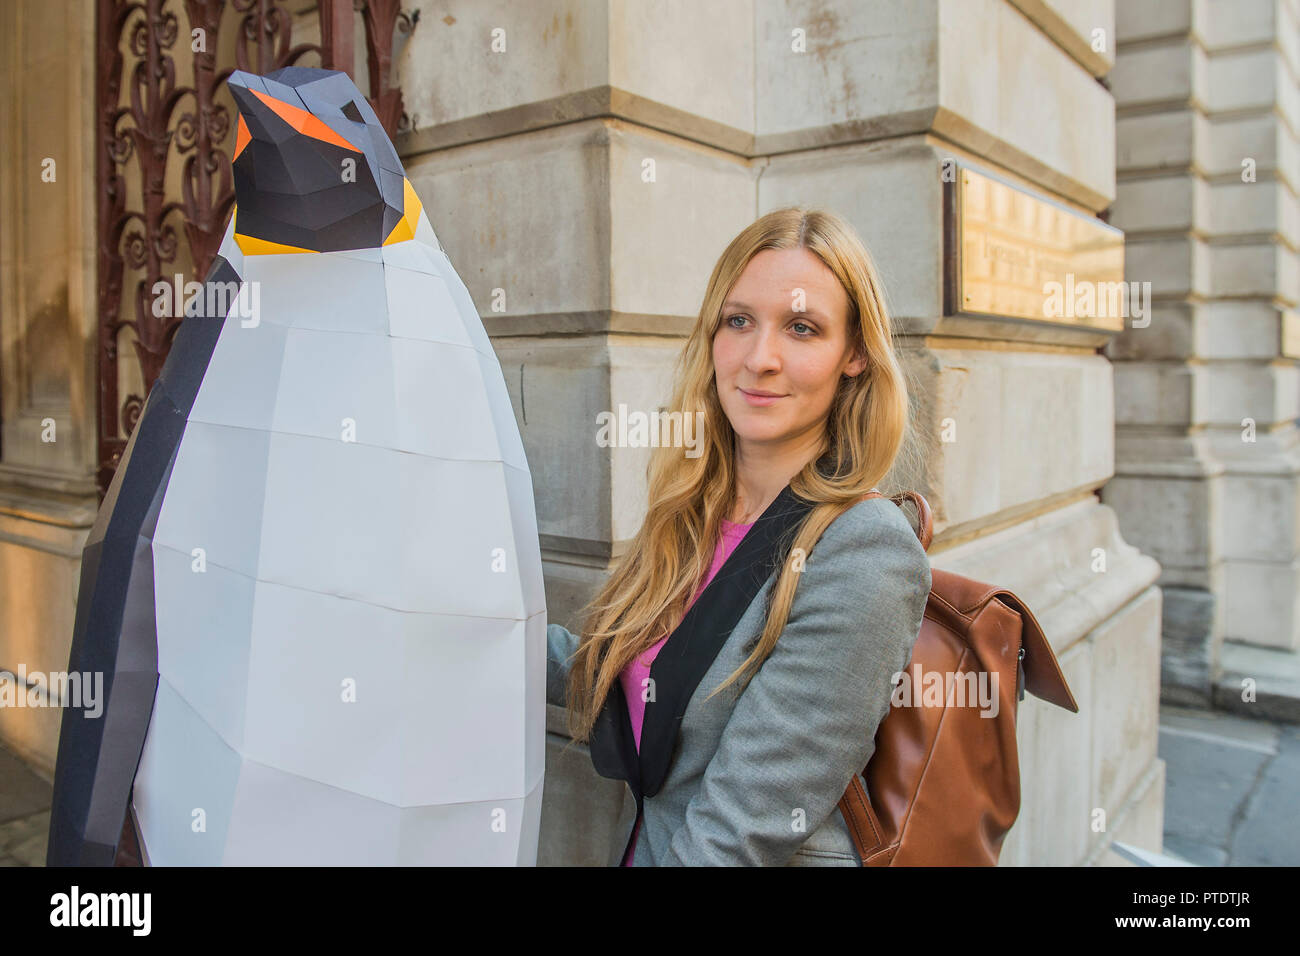 London, UK. 9th October, 2018. A Greenpeace spokesperson carries the penguin in to security - Gillian Anderson, Greenpeace Antarctic Ambassador, visits the Foreign & Commonwealth Office to deliver a petition calling for the creation of the largest protected area on Earth – a 1.8 million square kilometre Antarctic Ocean Sanctuary. Credit: Guy Bell/Alamy Live News Stock Photo